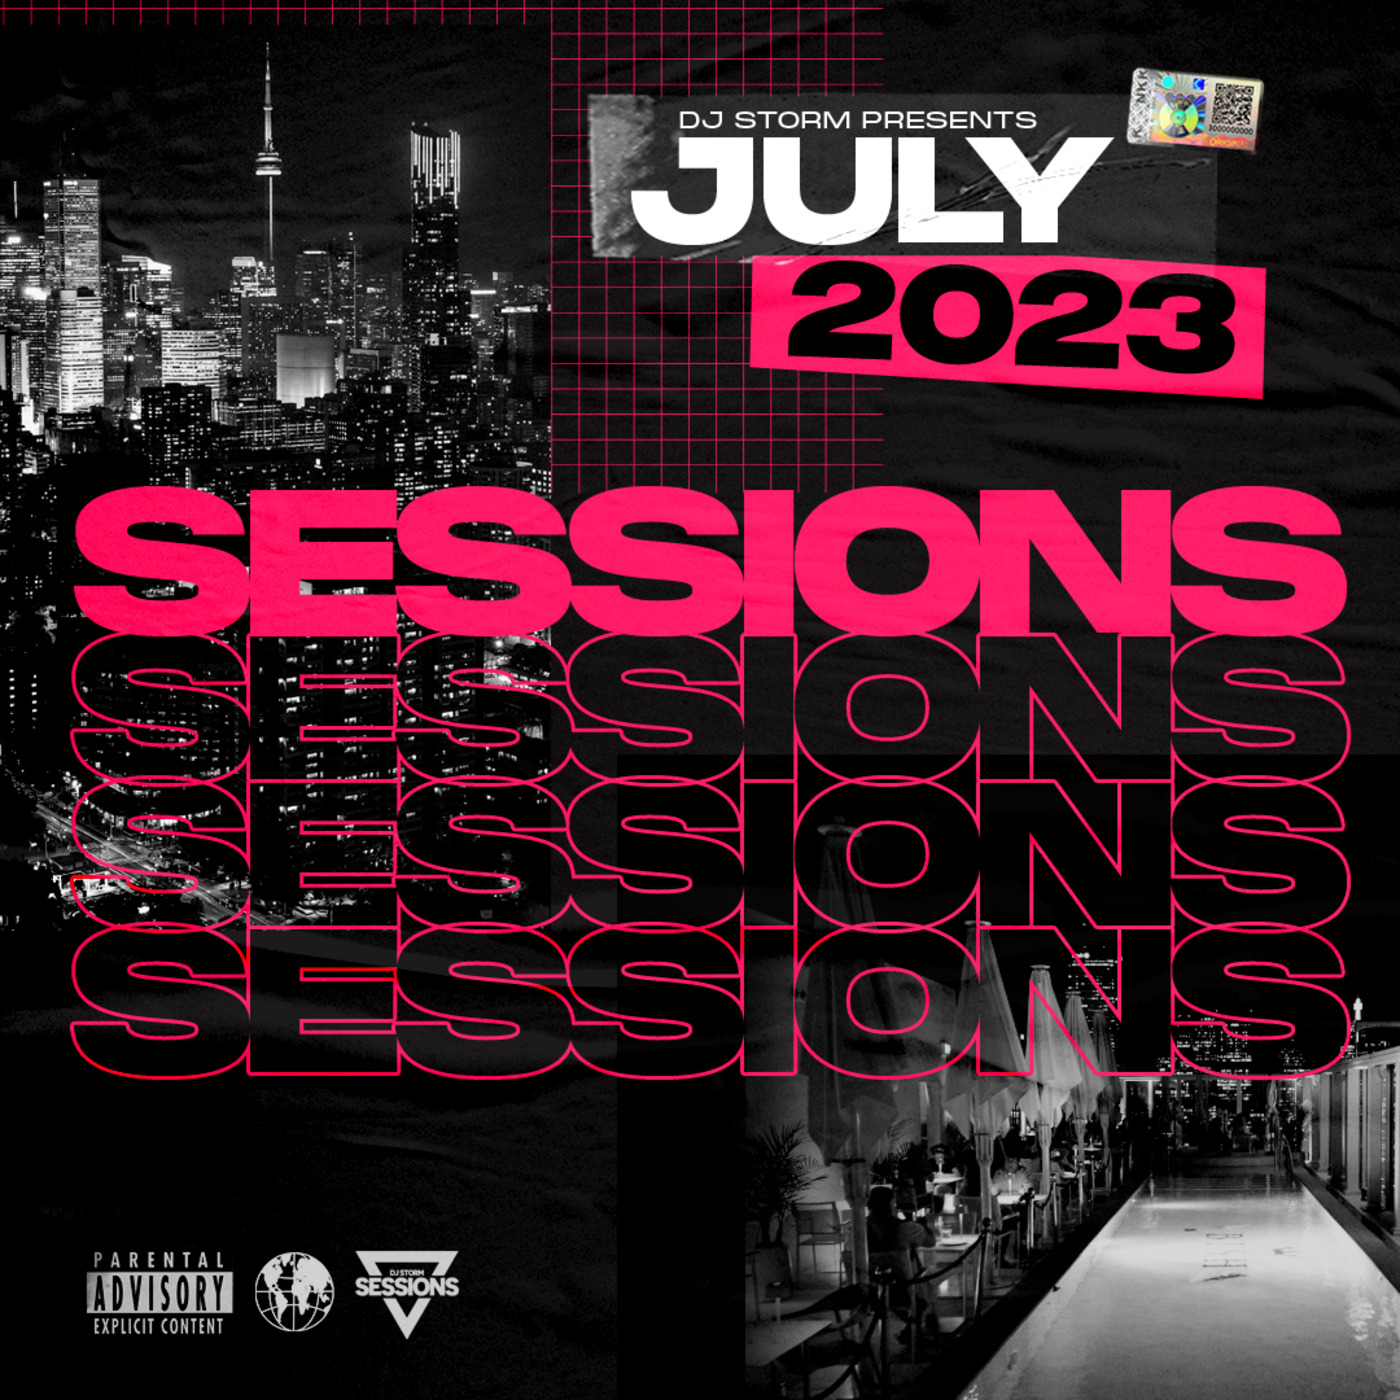 The Sessions - July 2023